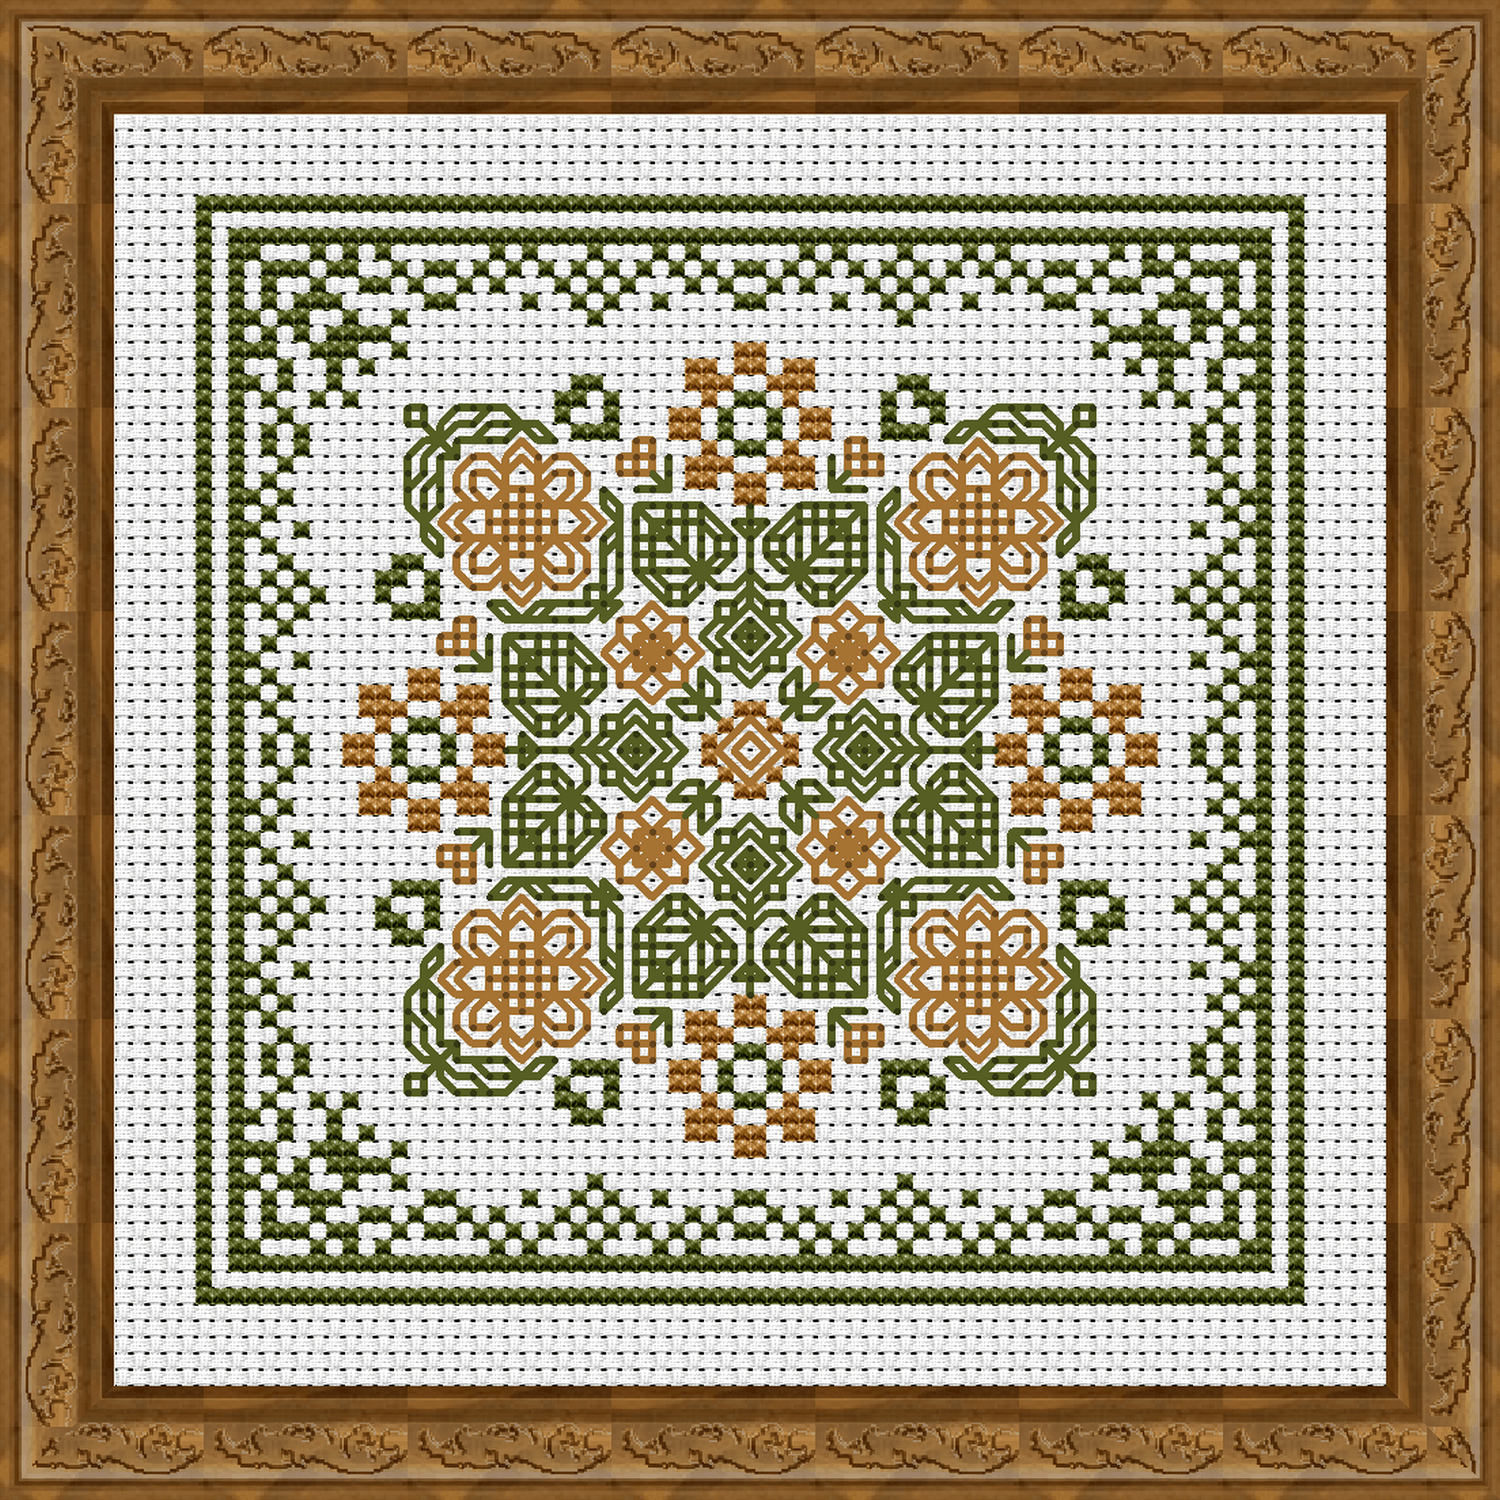 August Hearts Square with Sunflowers Cross Stitch Pattern 3507